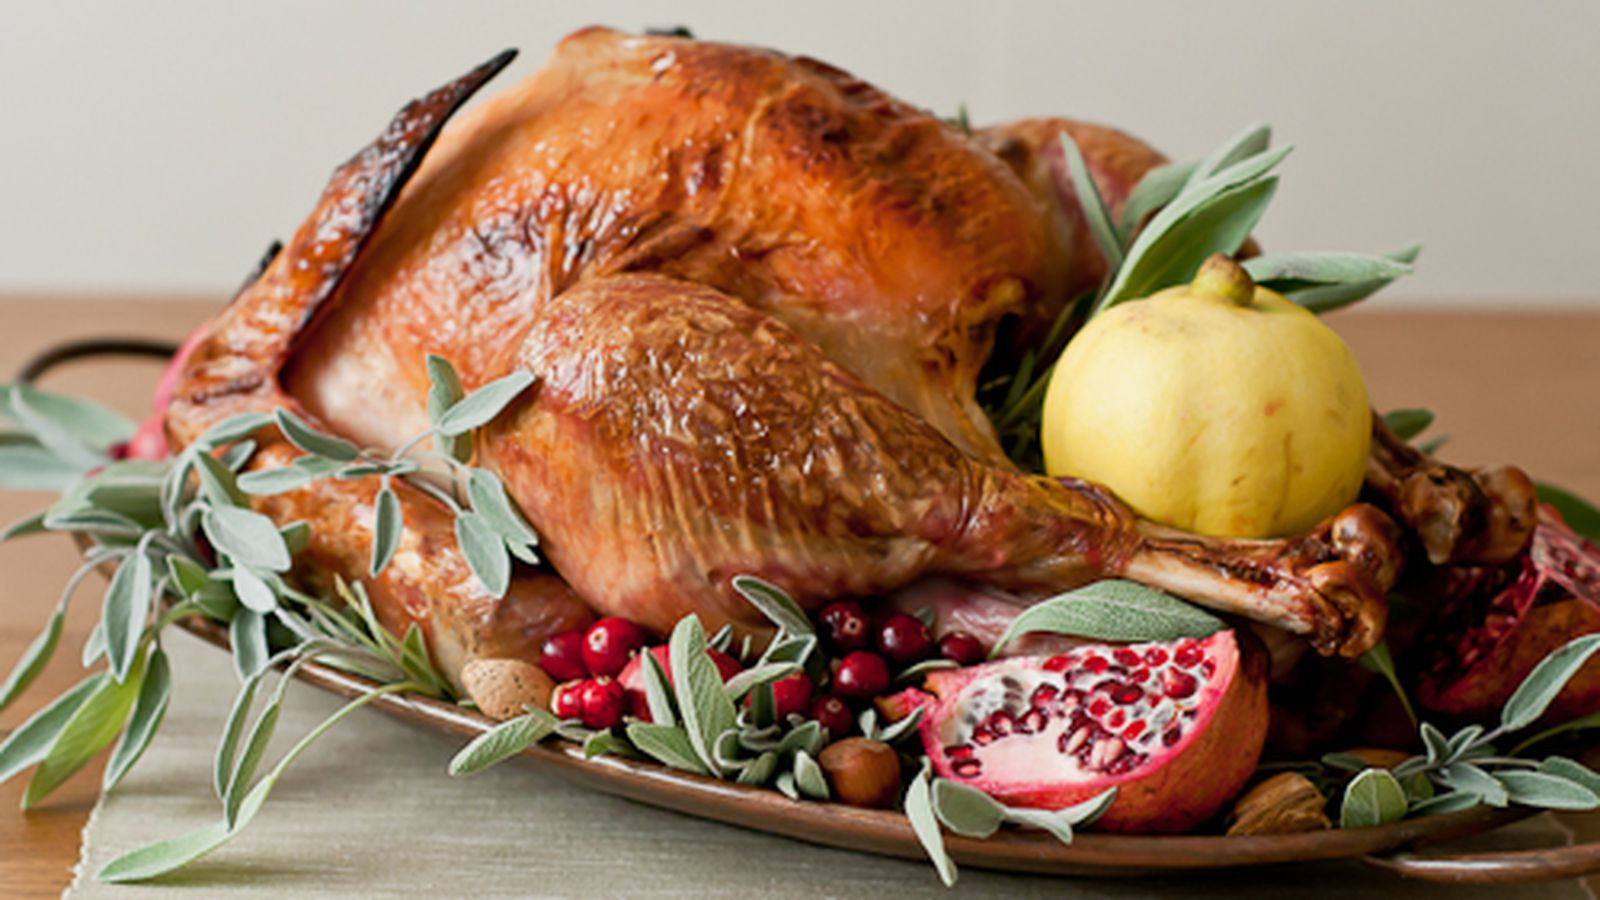 Turkey Recipes For Thanksgiving Dinner
 20 Places To Enjoy Thanksgiving Dinner In San Diego